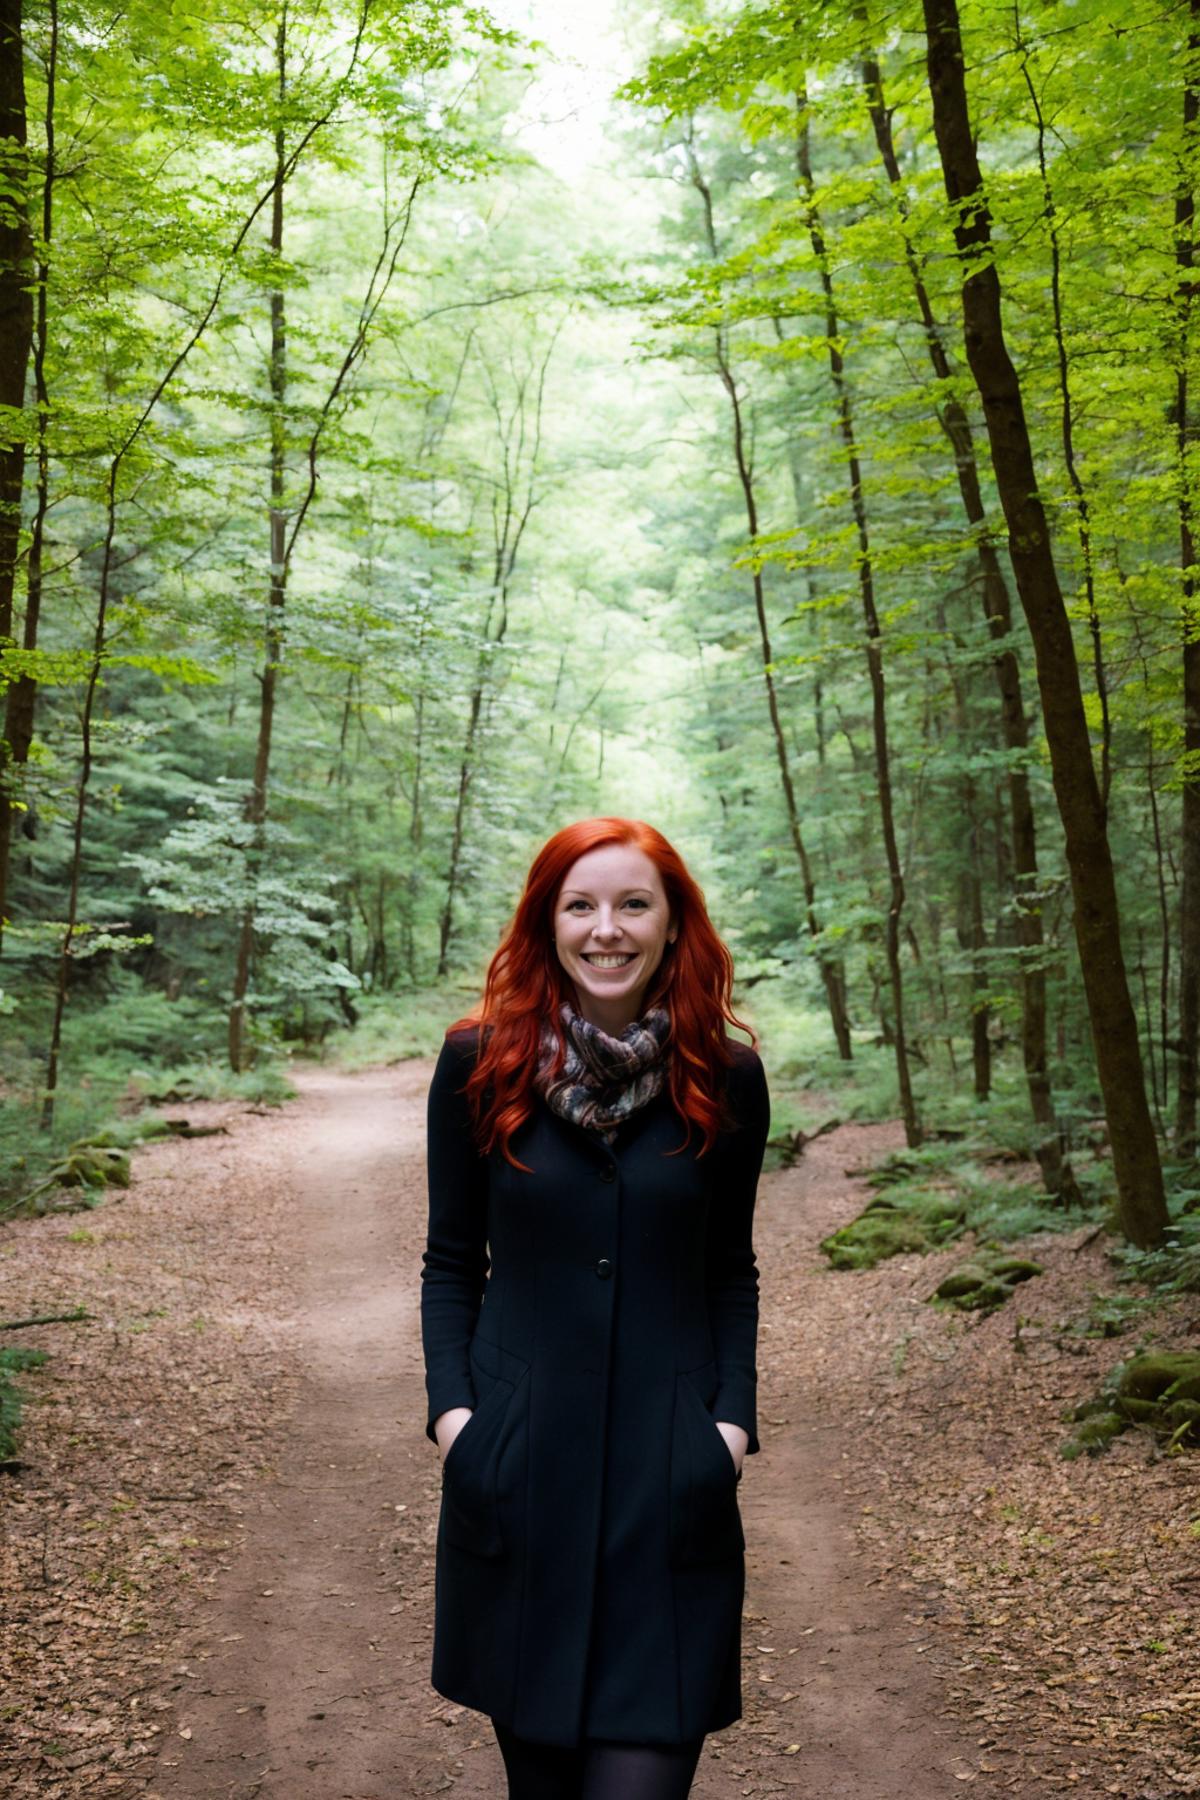 A smiling woman with red hair poses for a picture on a forest trail.